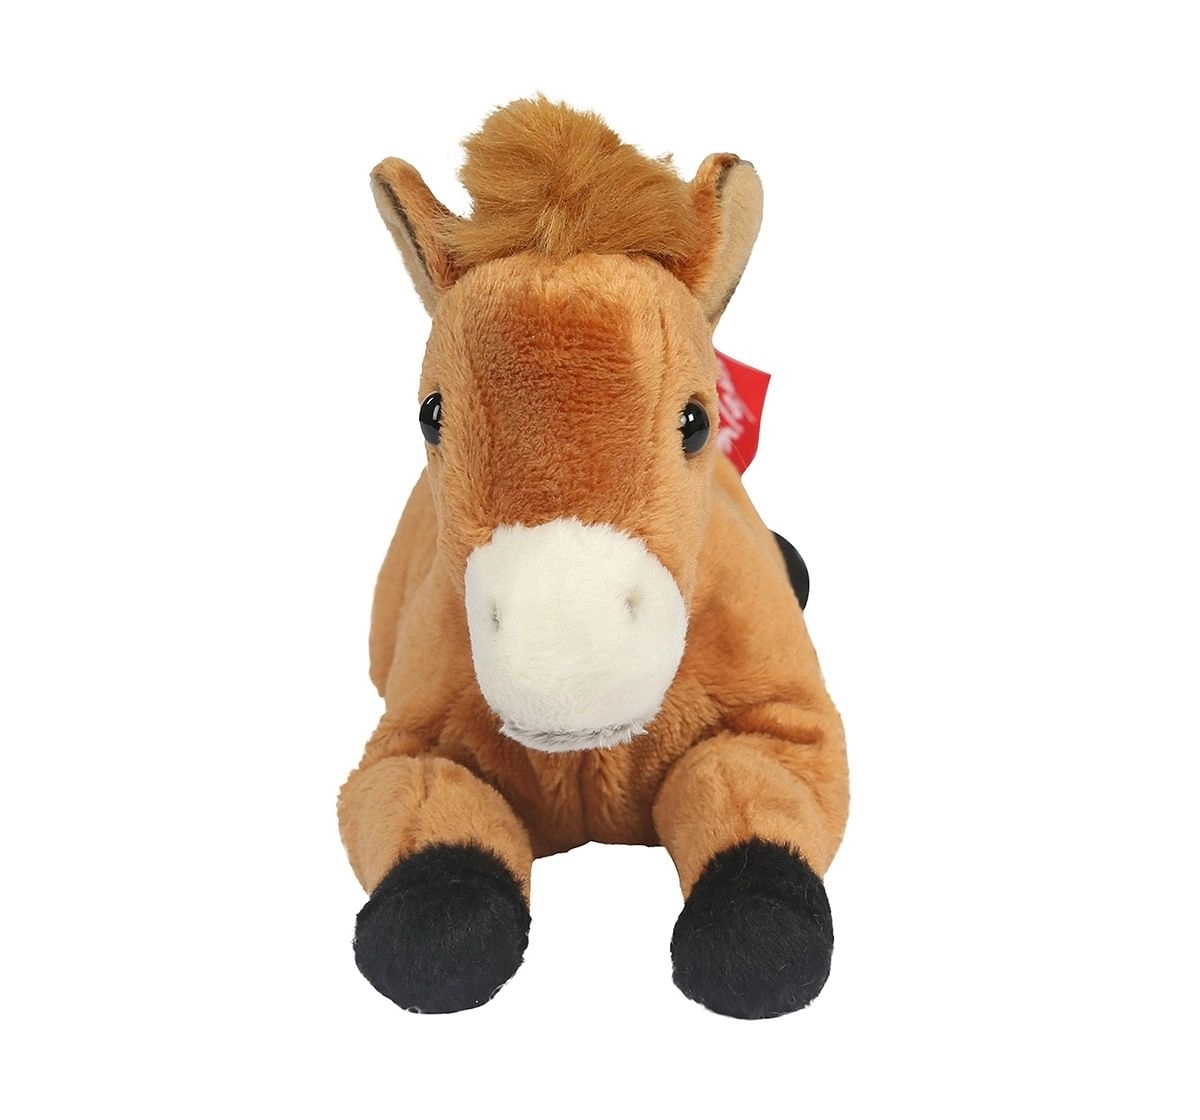  Hamleys Lying Horse Soft Toy (Brown) Animals & Birds for Kids age 0M+ - 6.6 Cm (Brown)